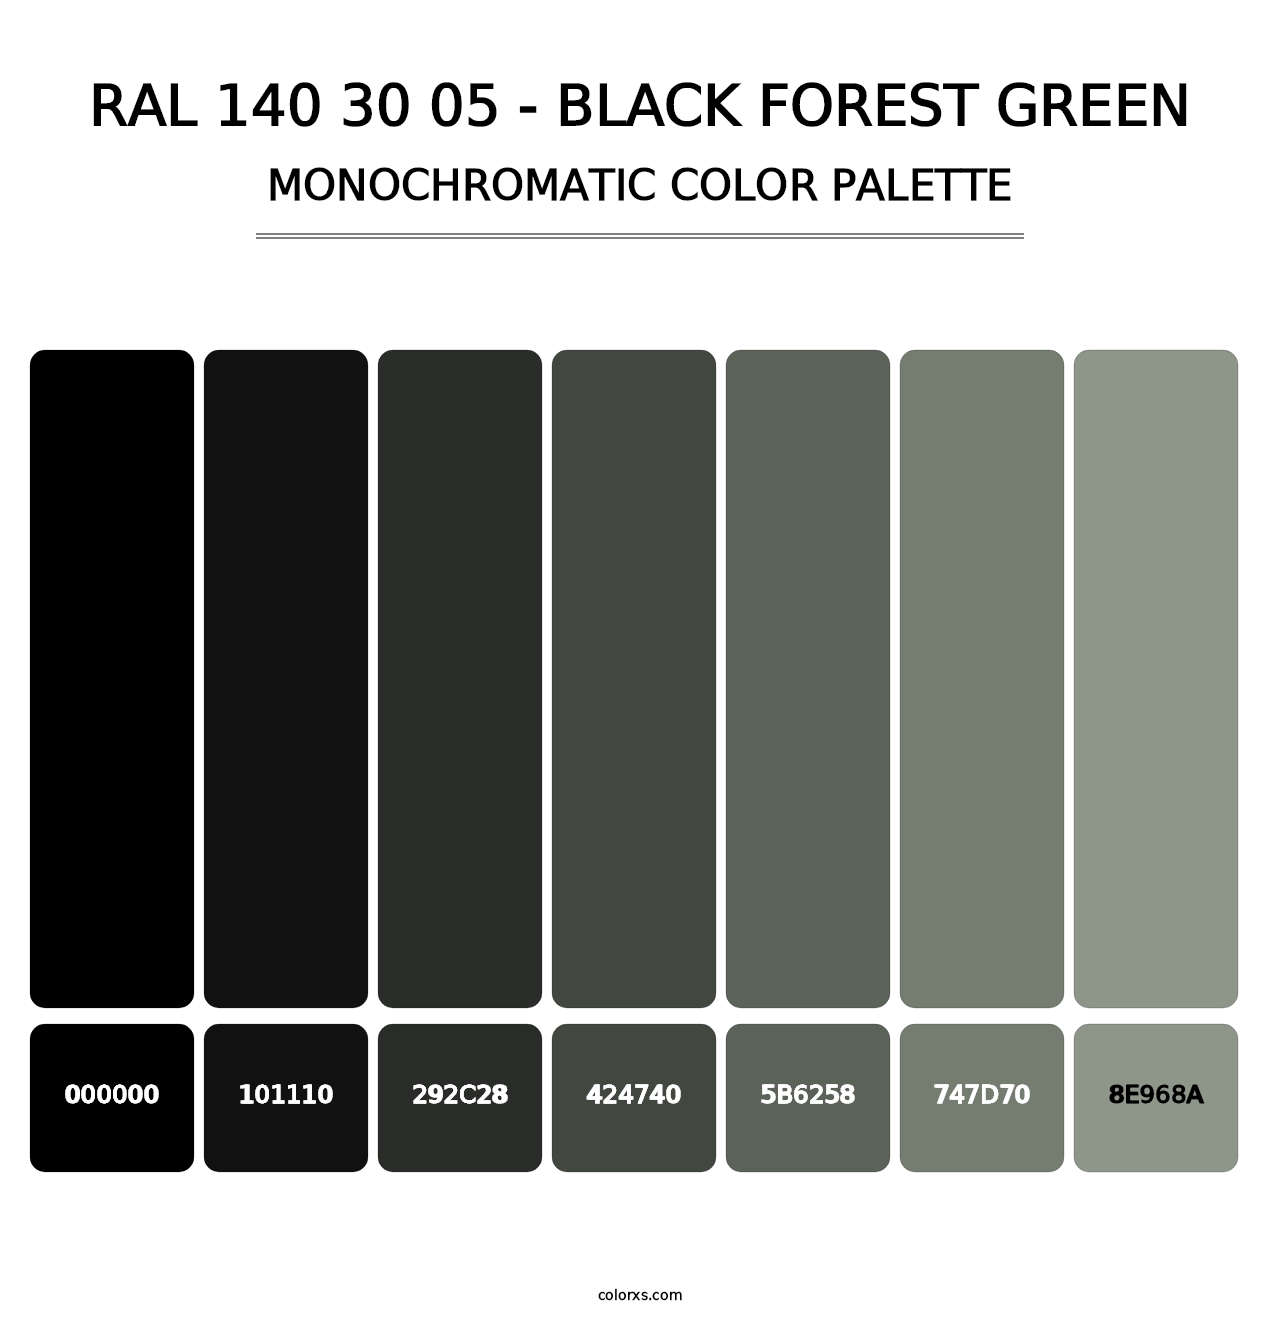 RAL 140 30 05 - Black Forest Green - Monochromatic Color Palette